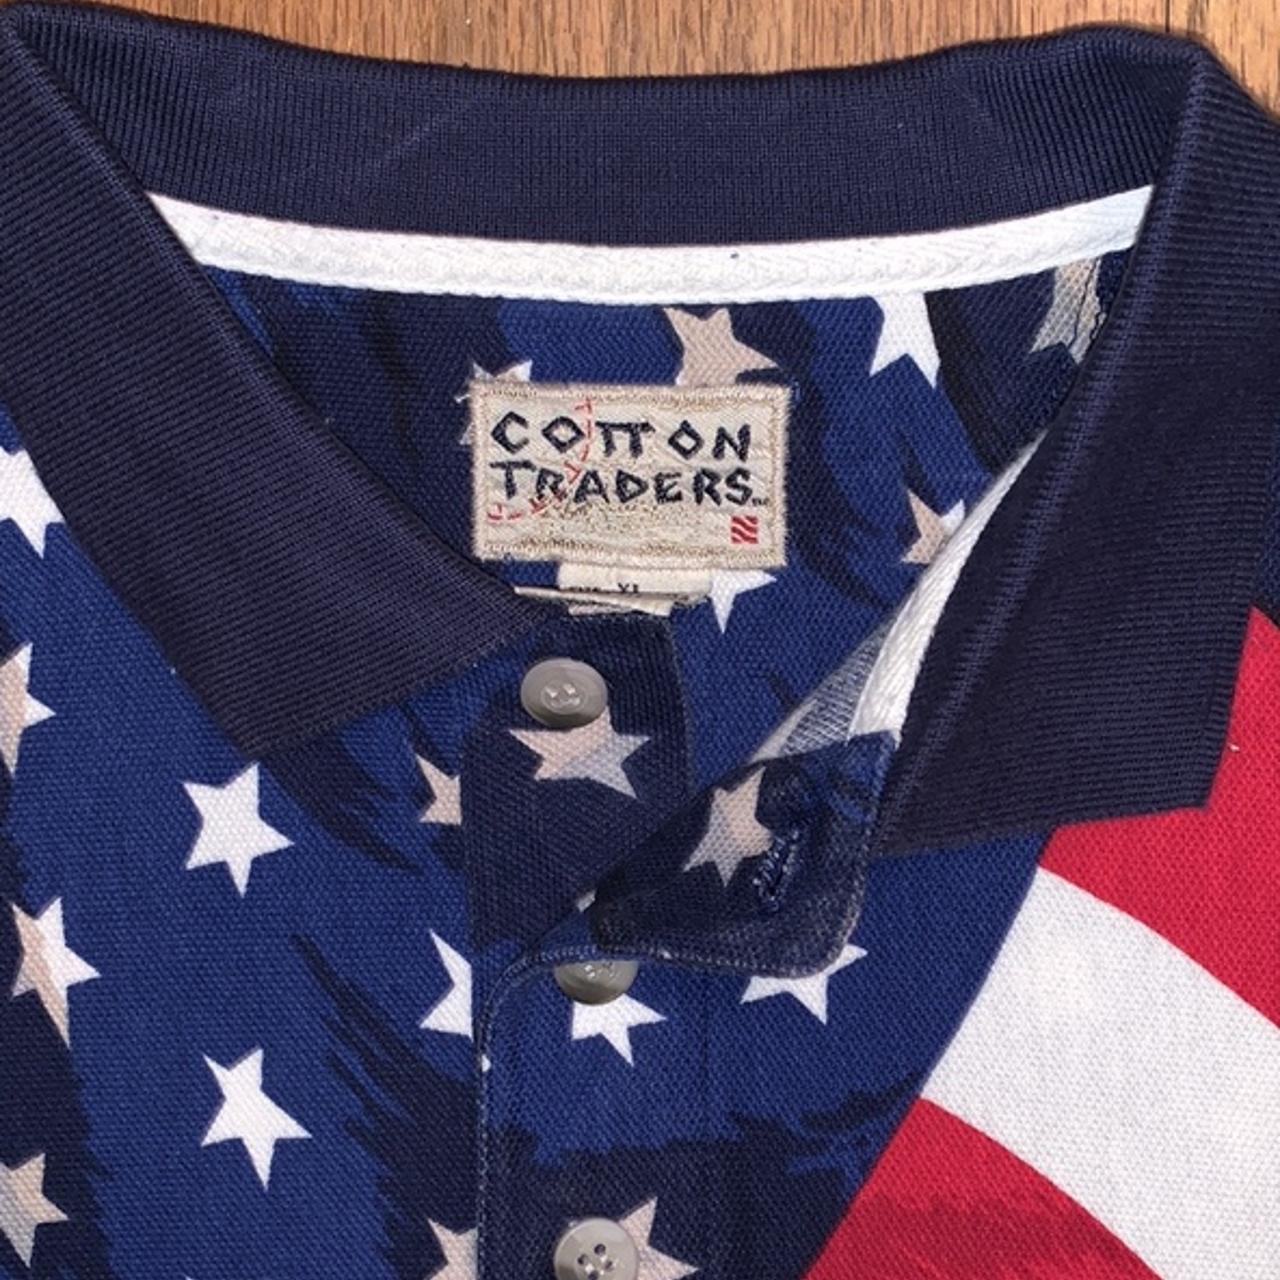 Product Image 2 - American Flag Cotton Traders Polo